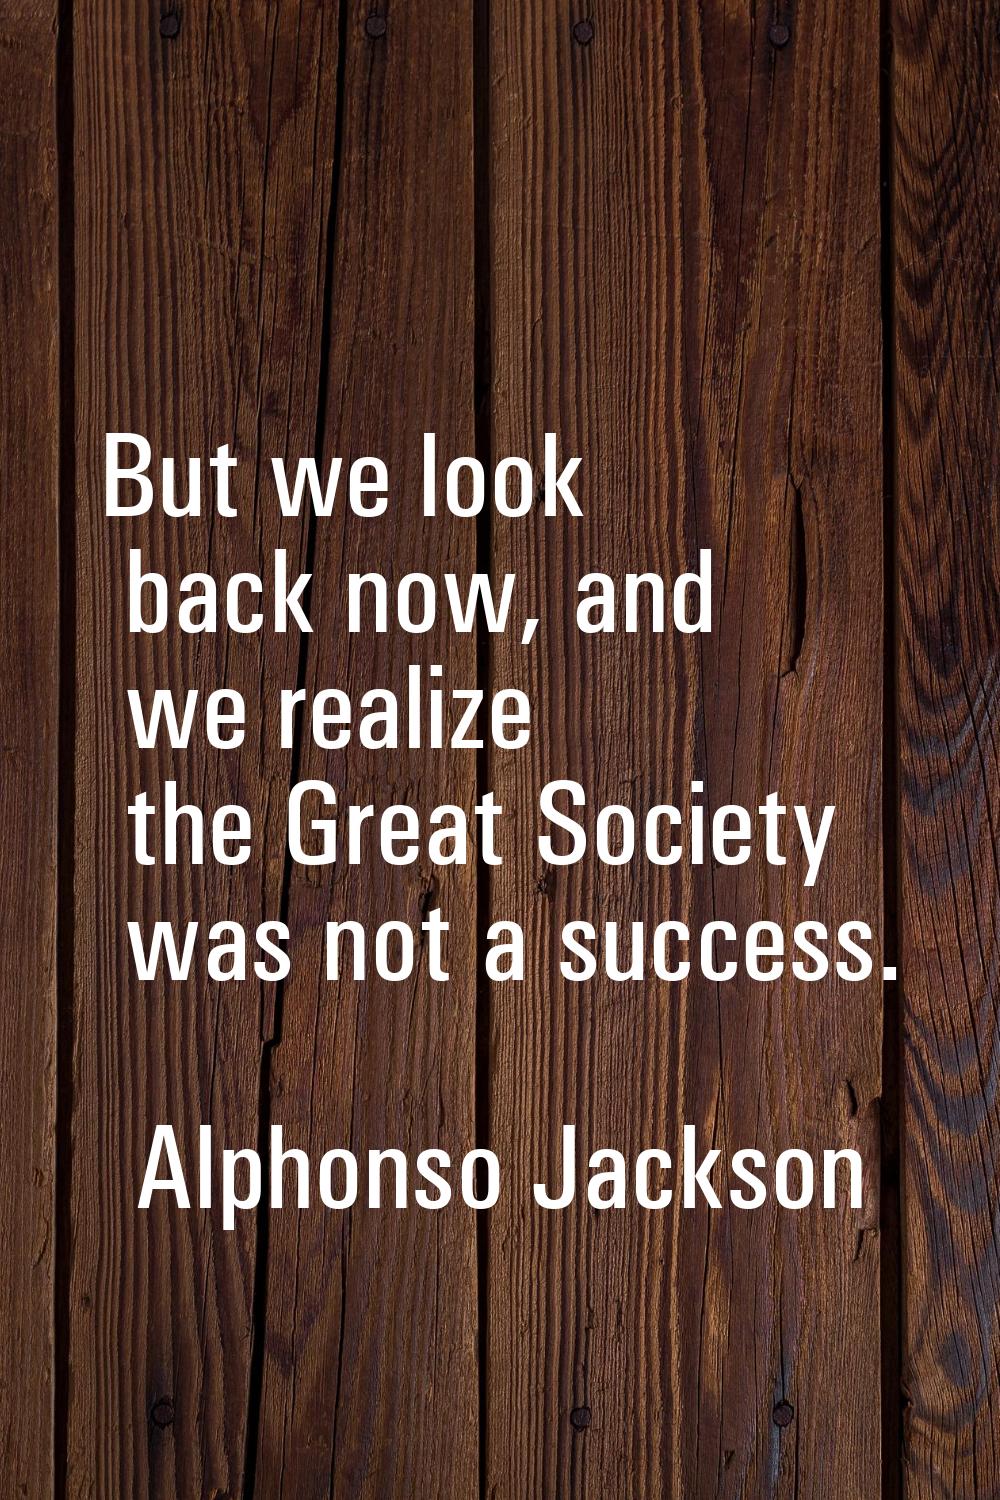 But we look back now, and we realize the Great Society was not a success.